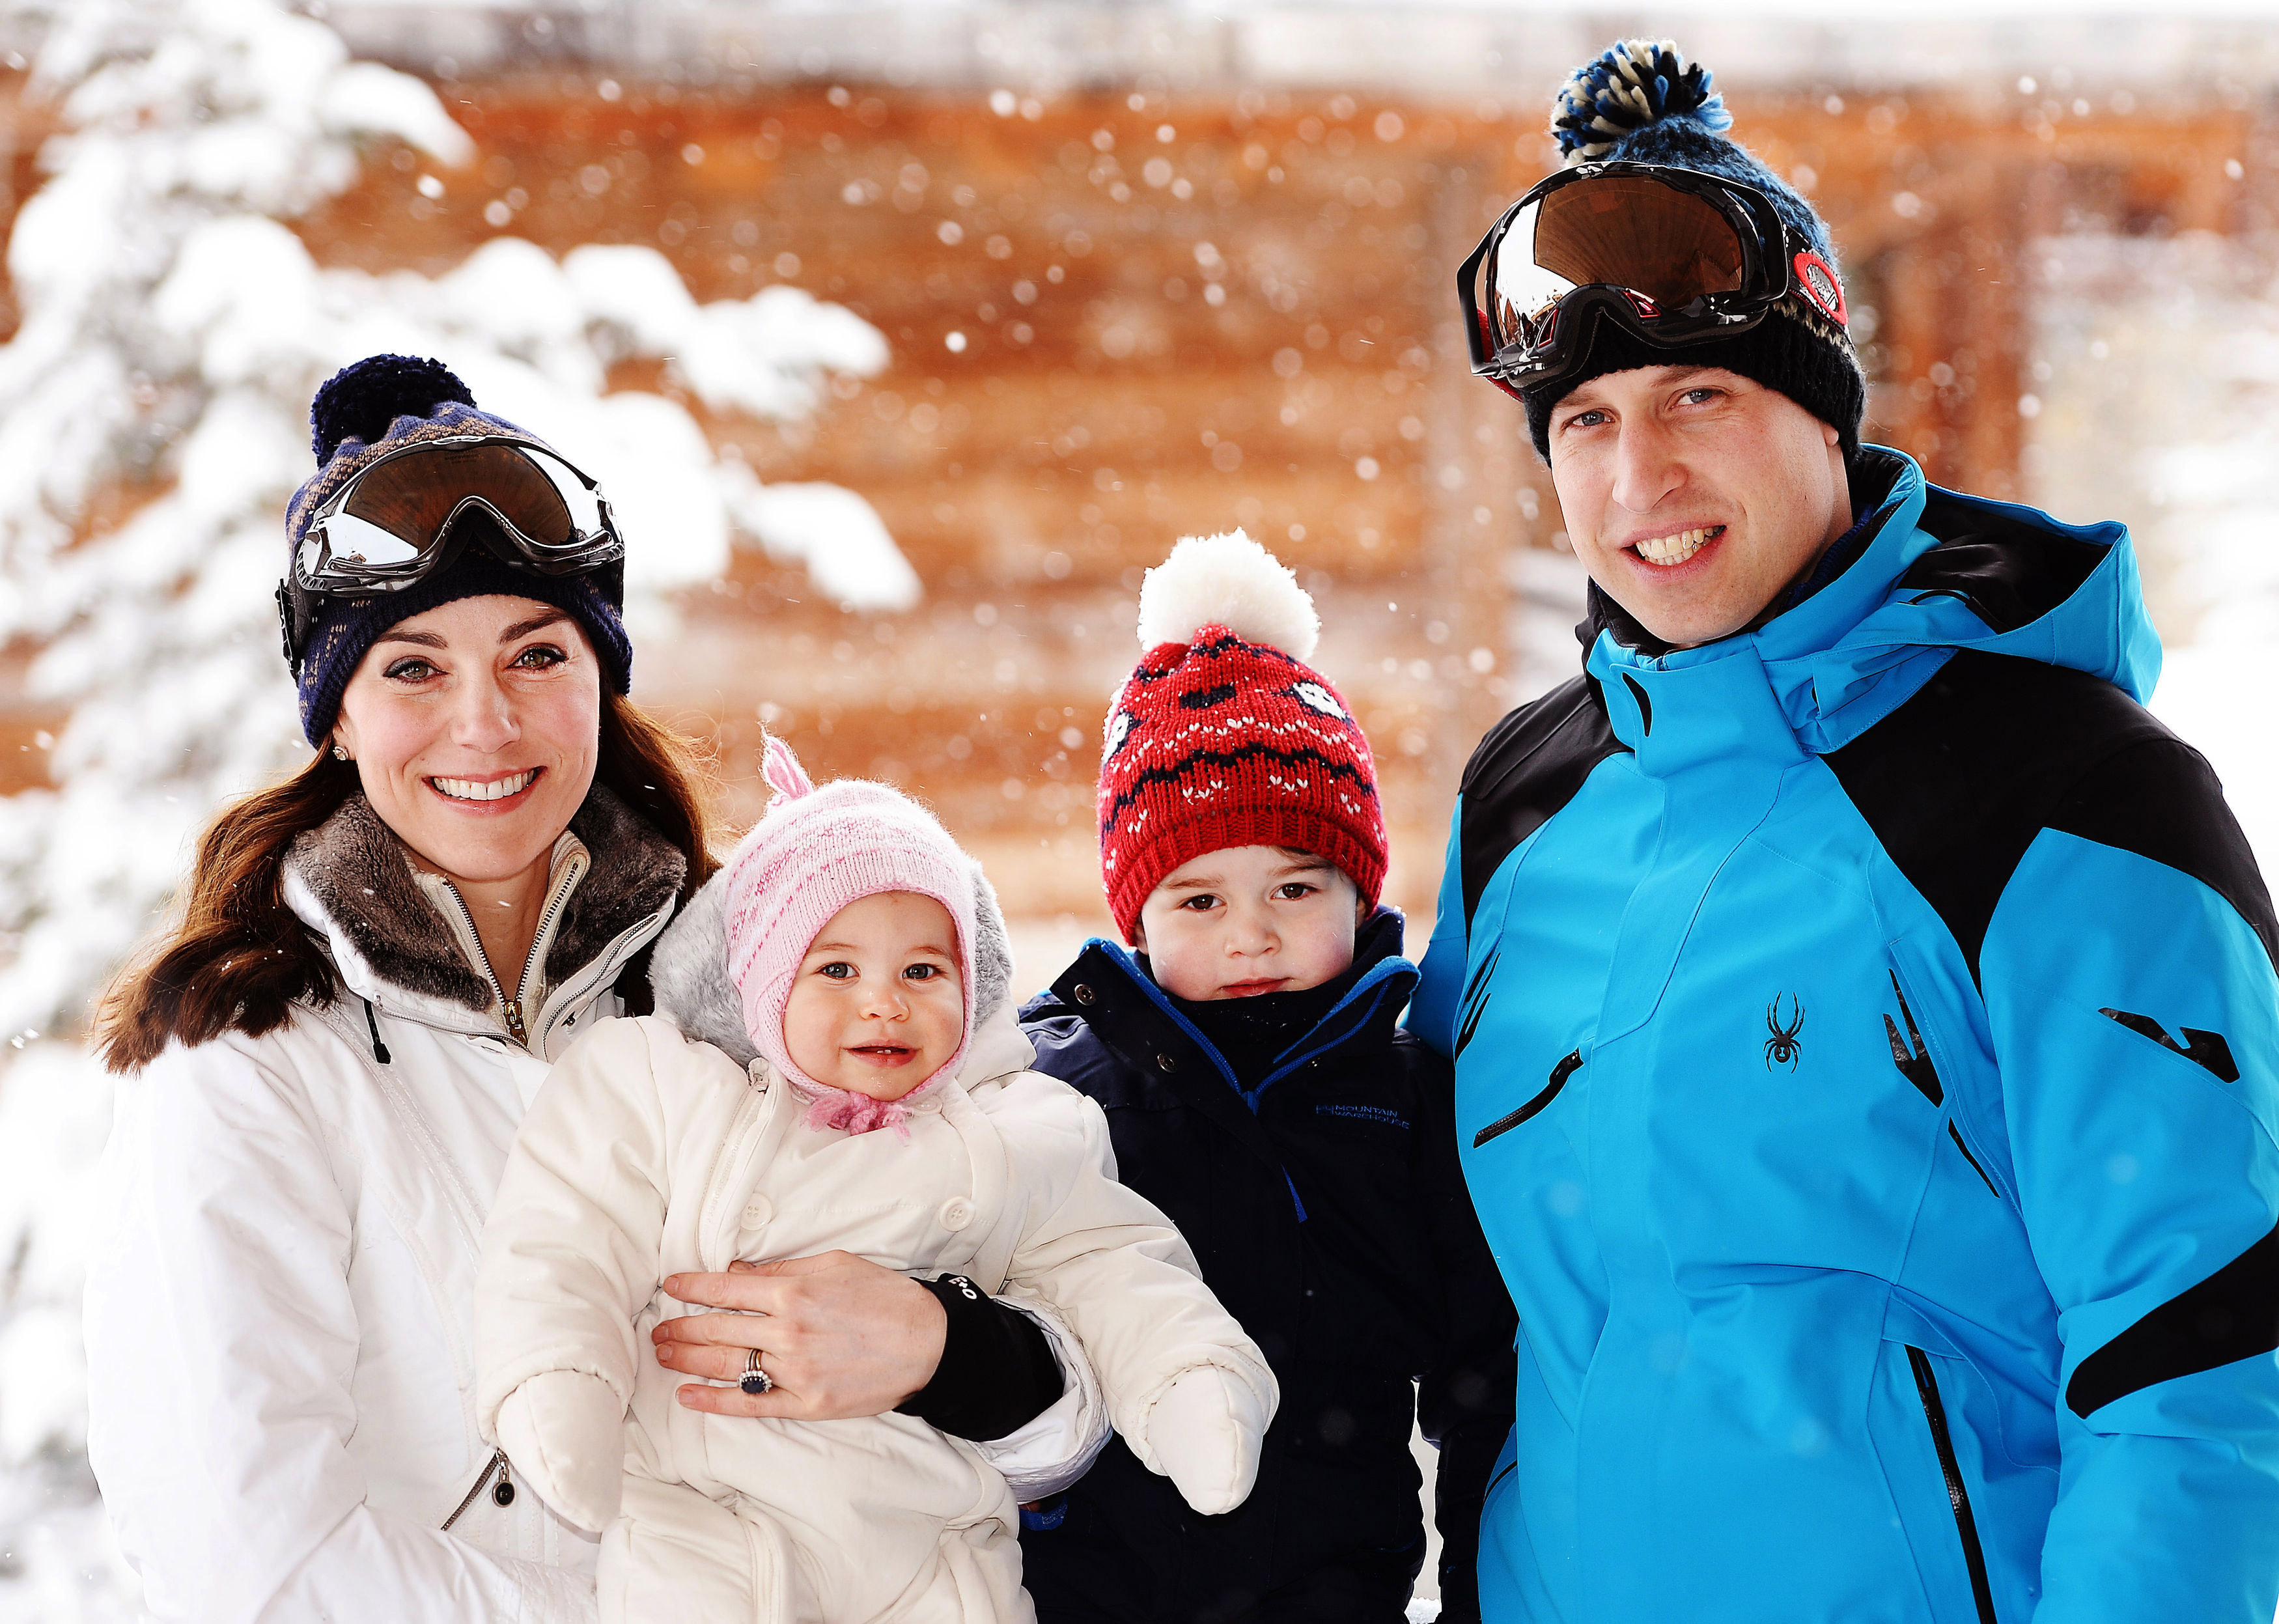 Catherine, Duchess of Cambridge and Prince William, Duke of Cambridge, with their children, Princess Charlotte and Prince George, enjoy a short private skiing break on March 3, 2016 in the French Alps, France. (John Stillwell—WPA Pool/Getty Images)